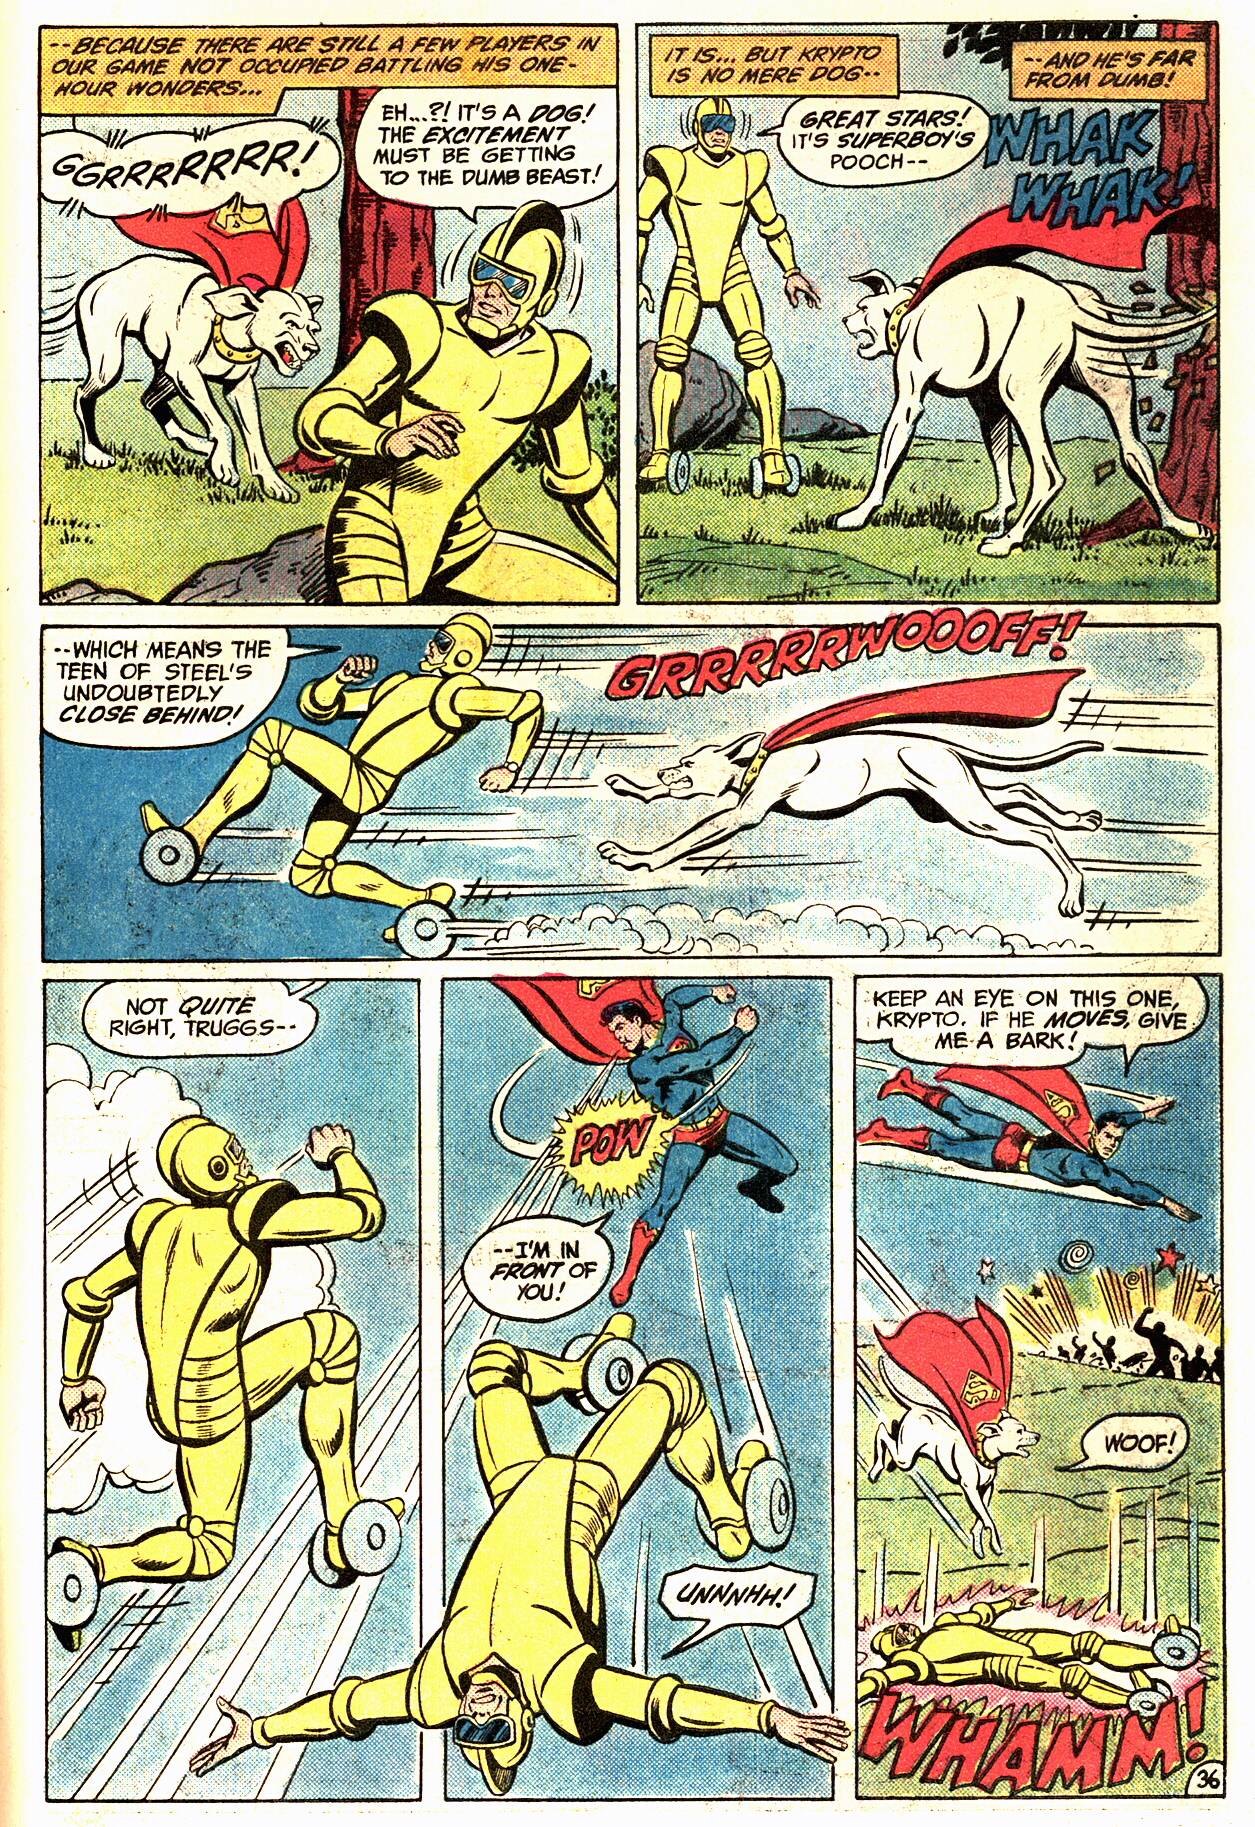 The New Adventures of Superboy 50 Page 36